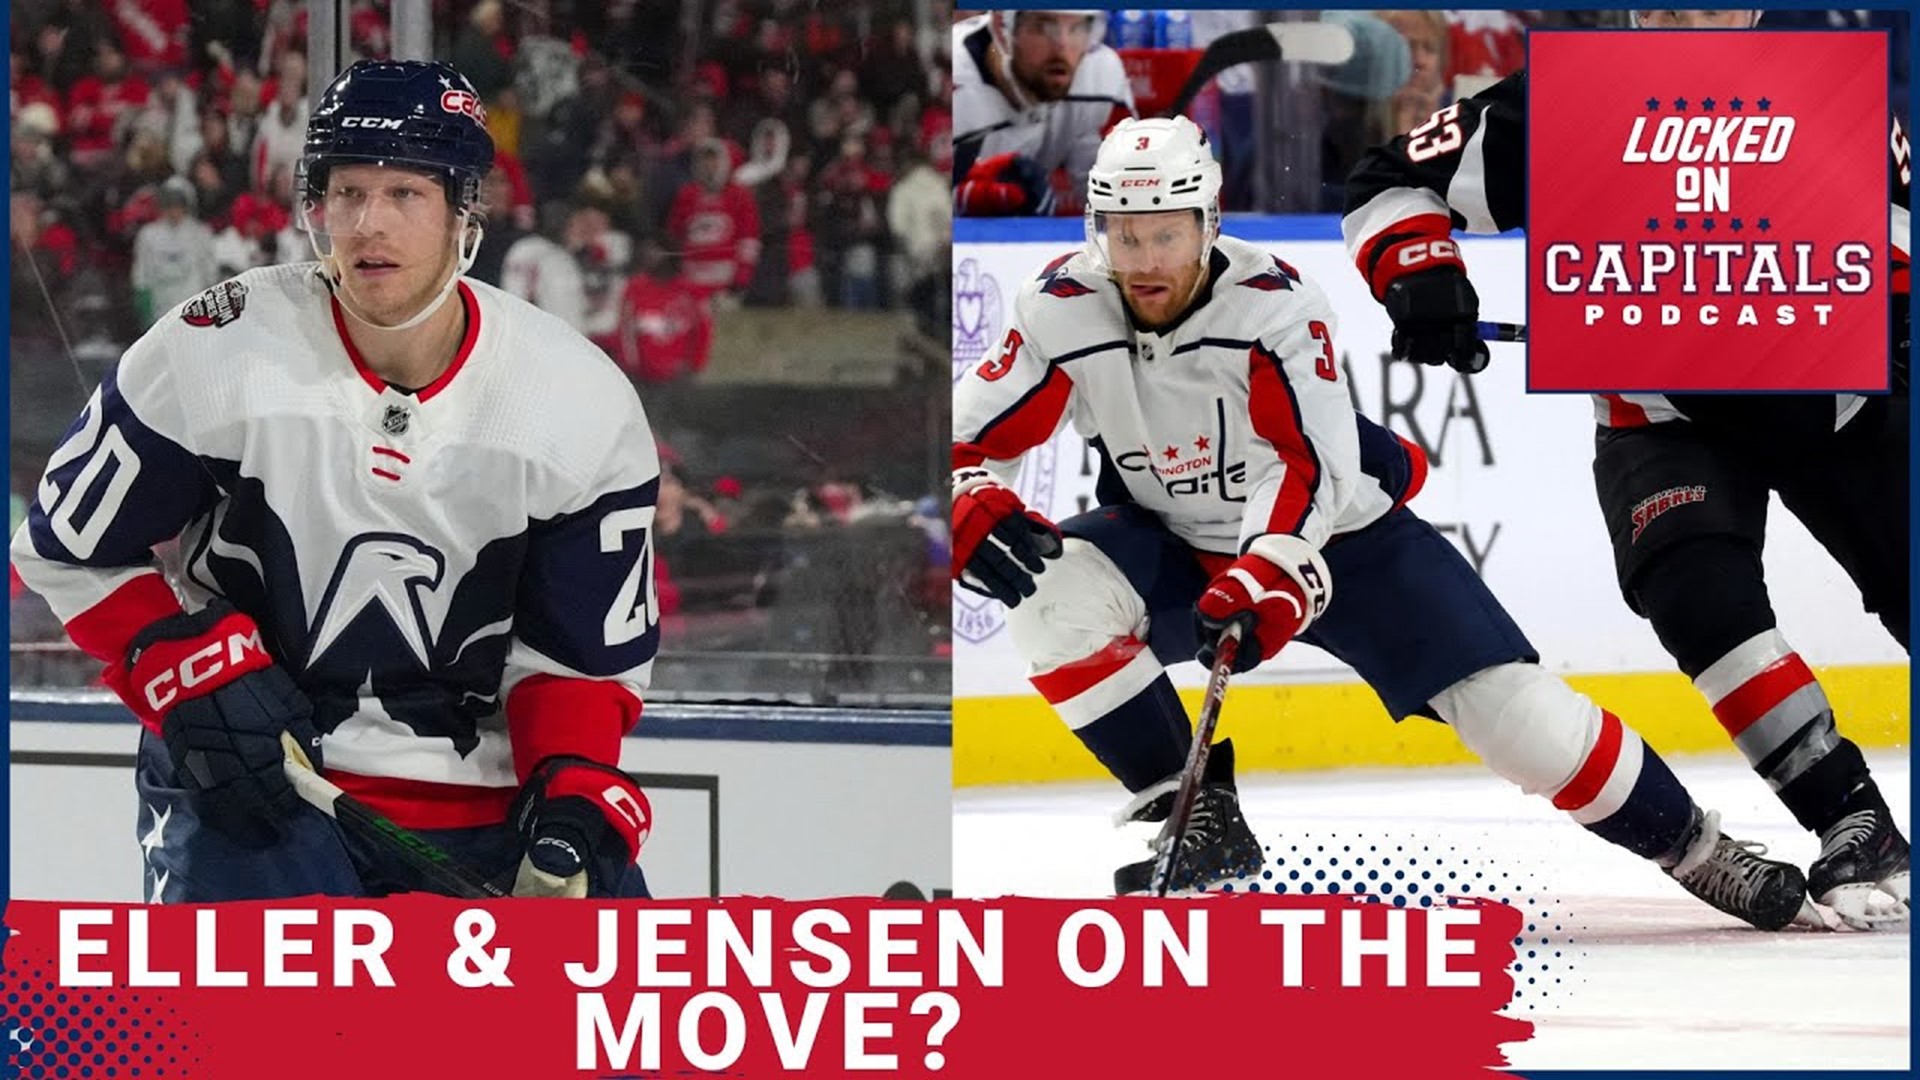 In this edition of Locked on Capitals Dan talks about the trade rumors surrounding this team.